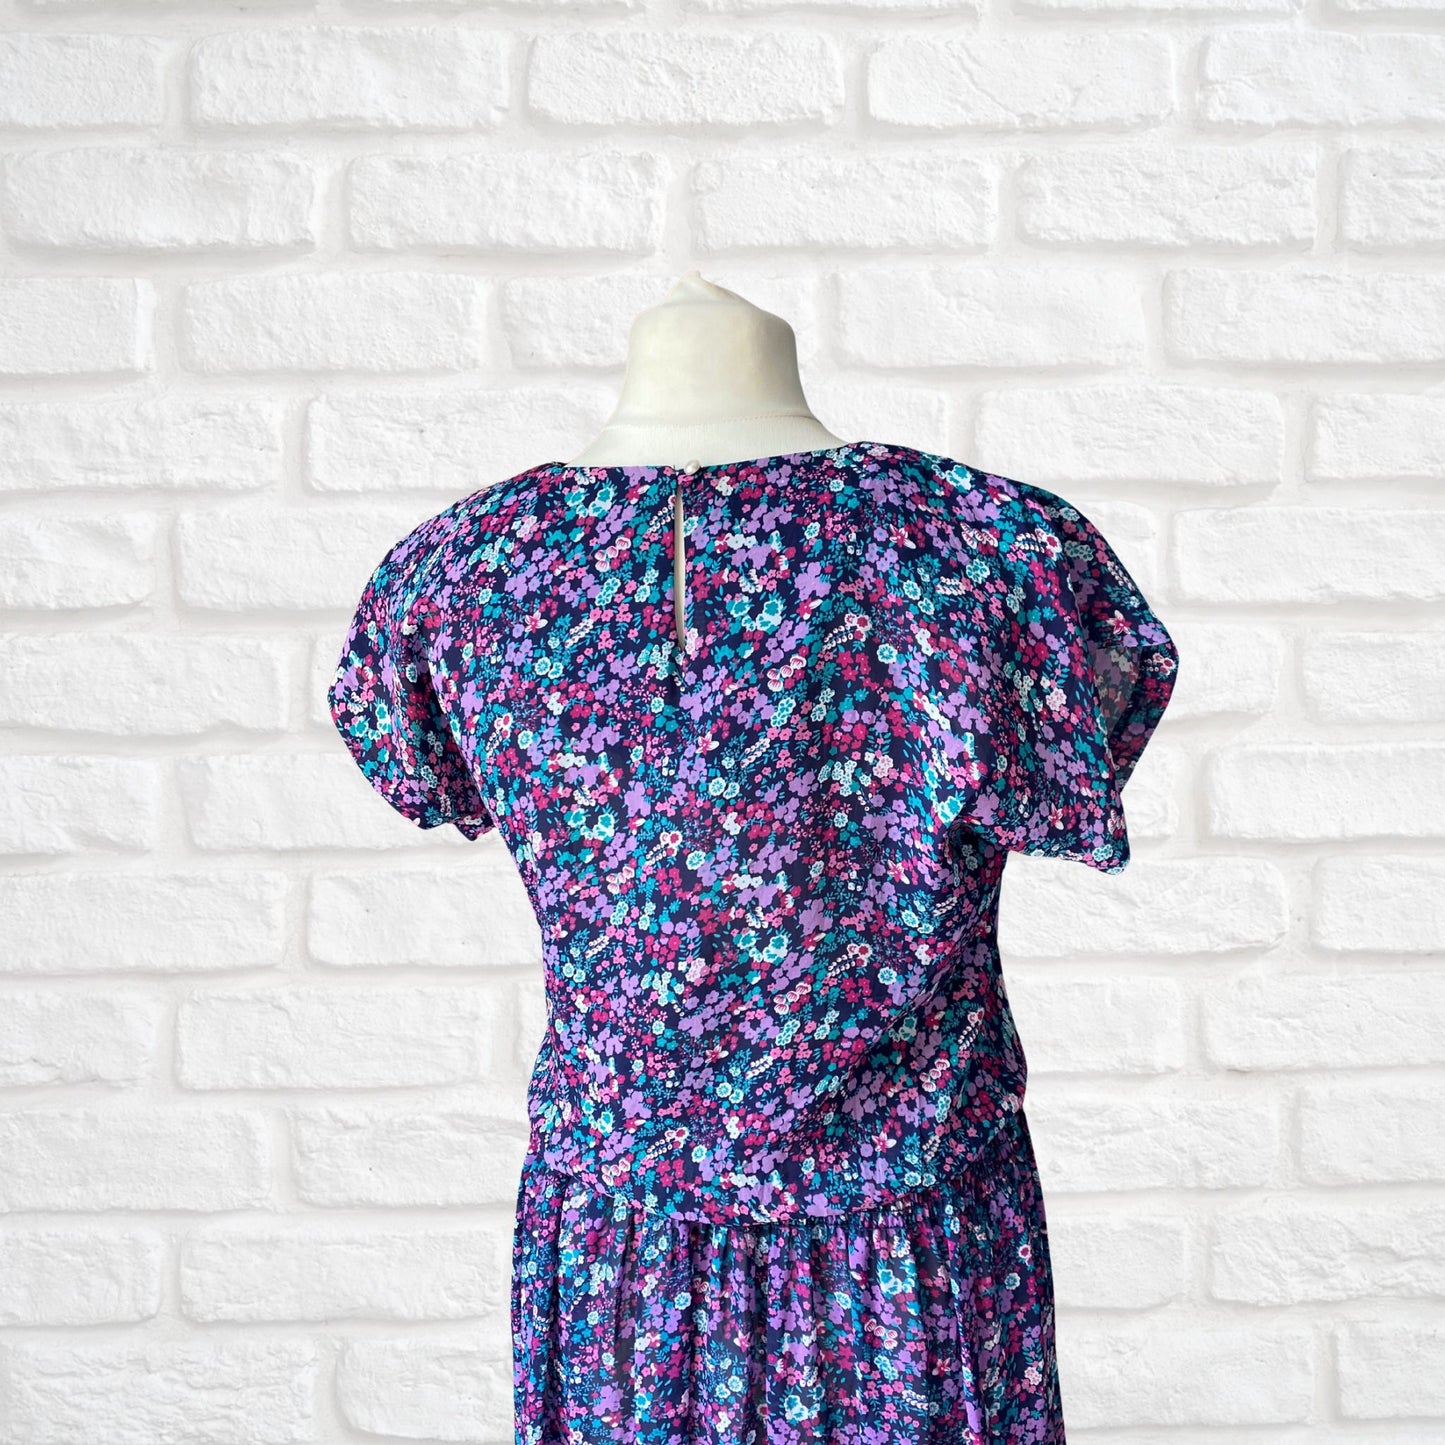 Vintage 80s Floral Blouson Tea Dress - Made in USA, Patty O'Neil. Approx UK size 14-16